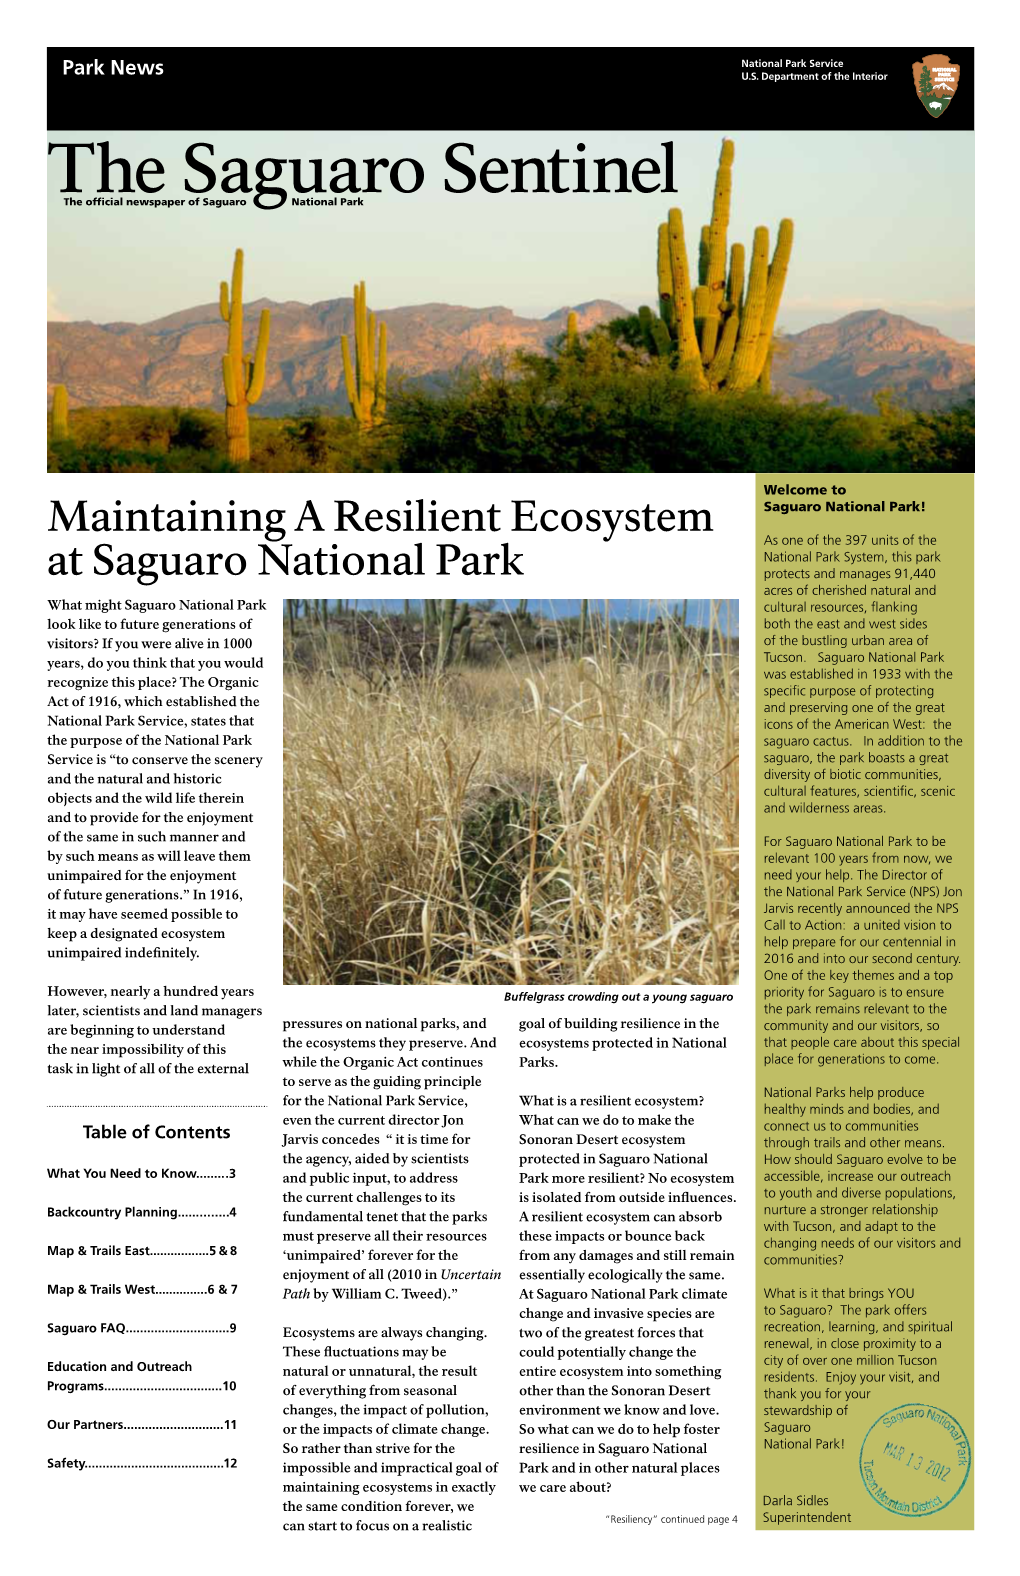 The Saguaro Sentinel Is Published by Saguaro National Park with Assistance from Western National Parks Association (WNPA)